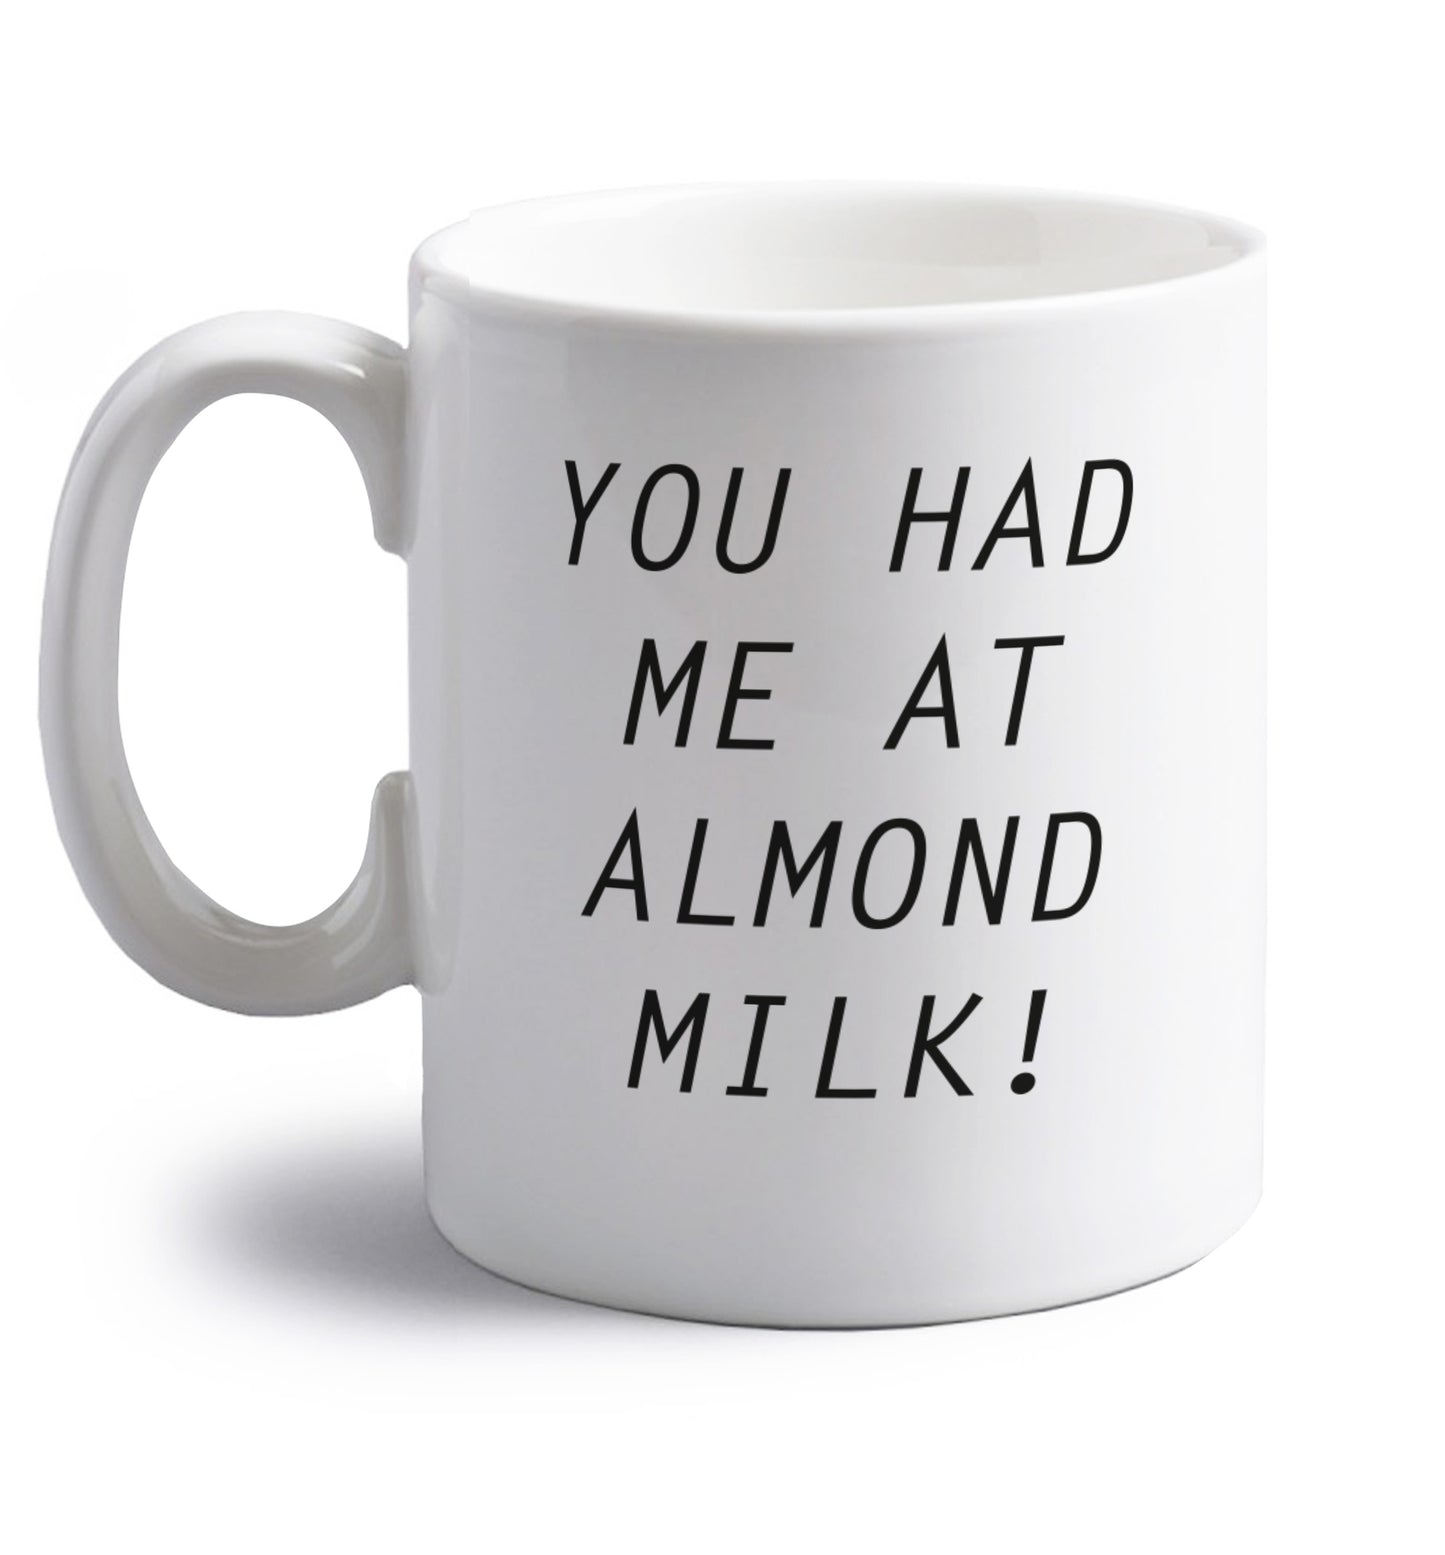 You had me at almond milk right handed white ceramic mug 